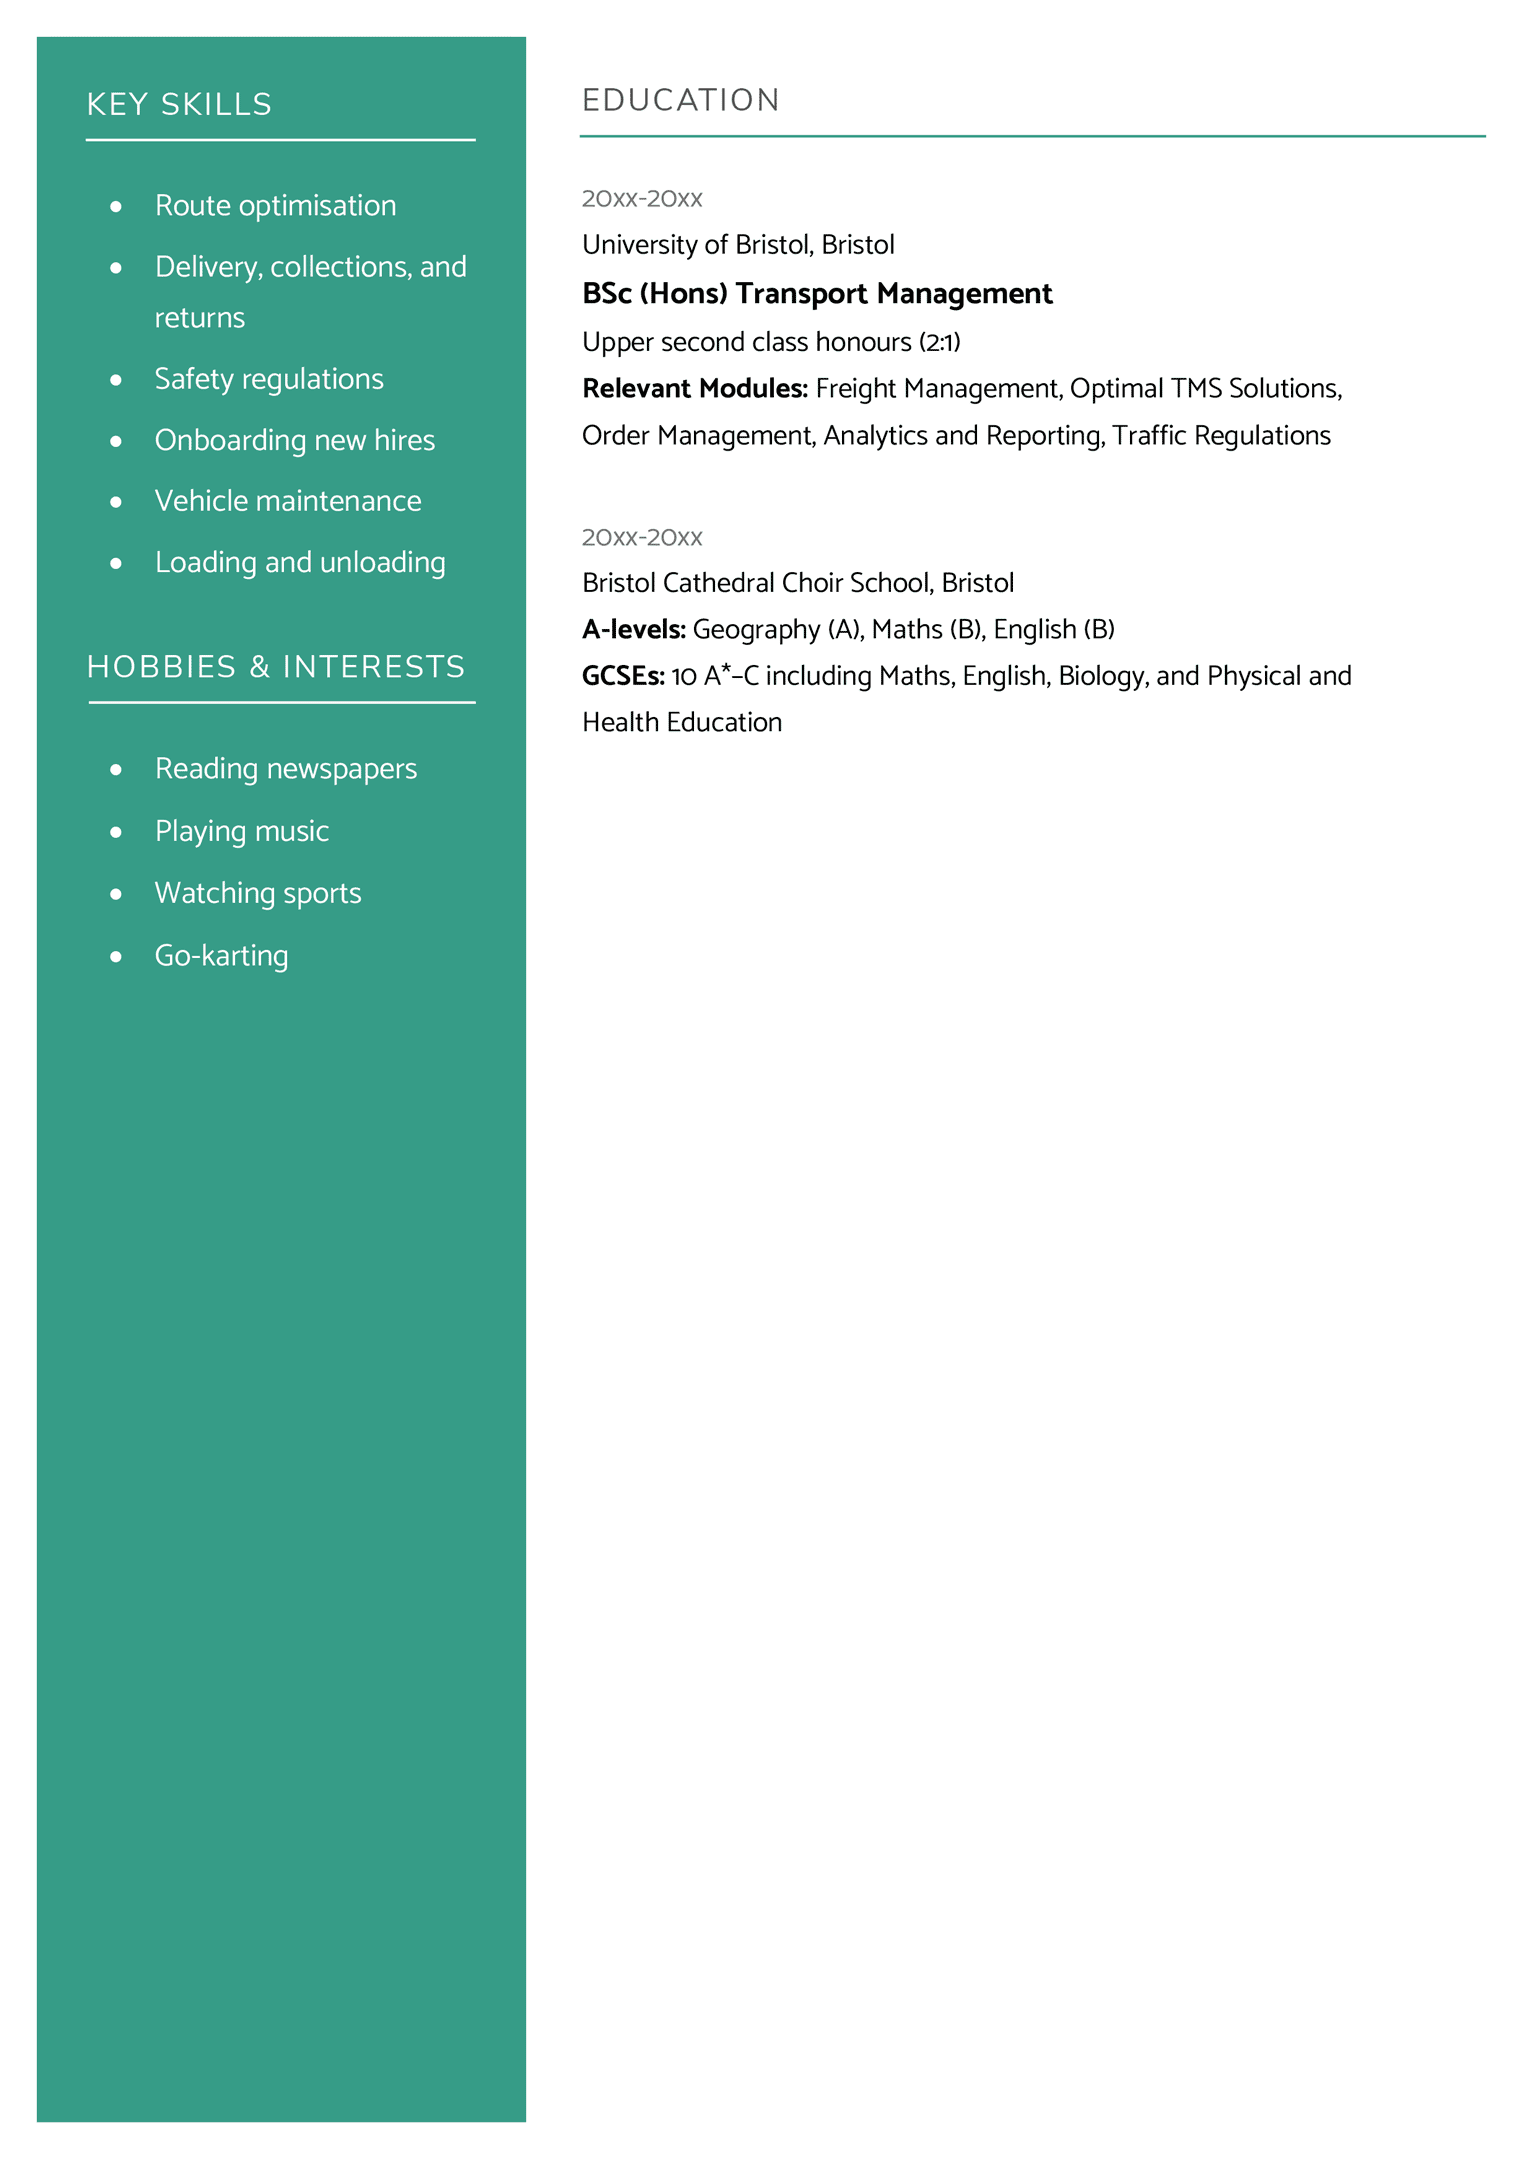 The second page of the Inverness CV template in green, which features a colourful sidebar containing the applicant's key skills and interests. The rest of the page is dedicated to the applicant's qualifications.